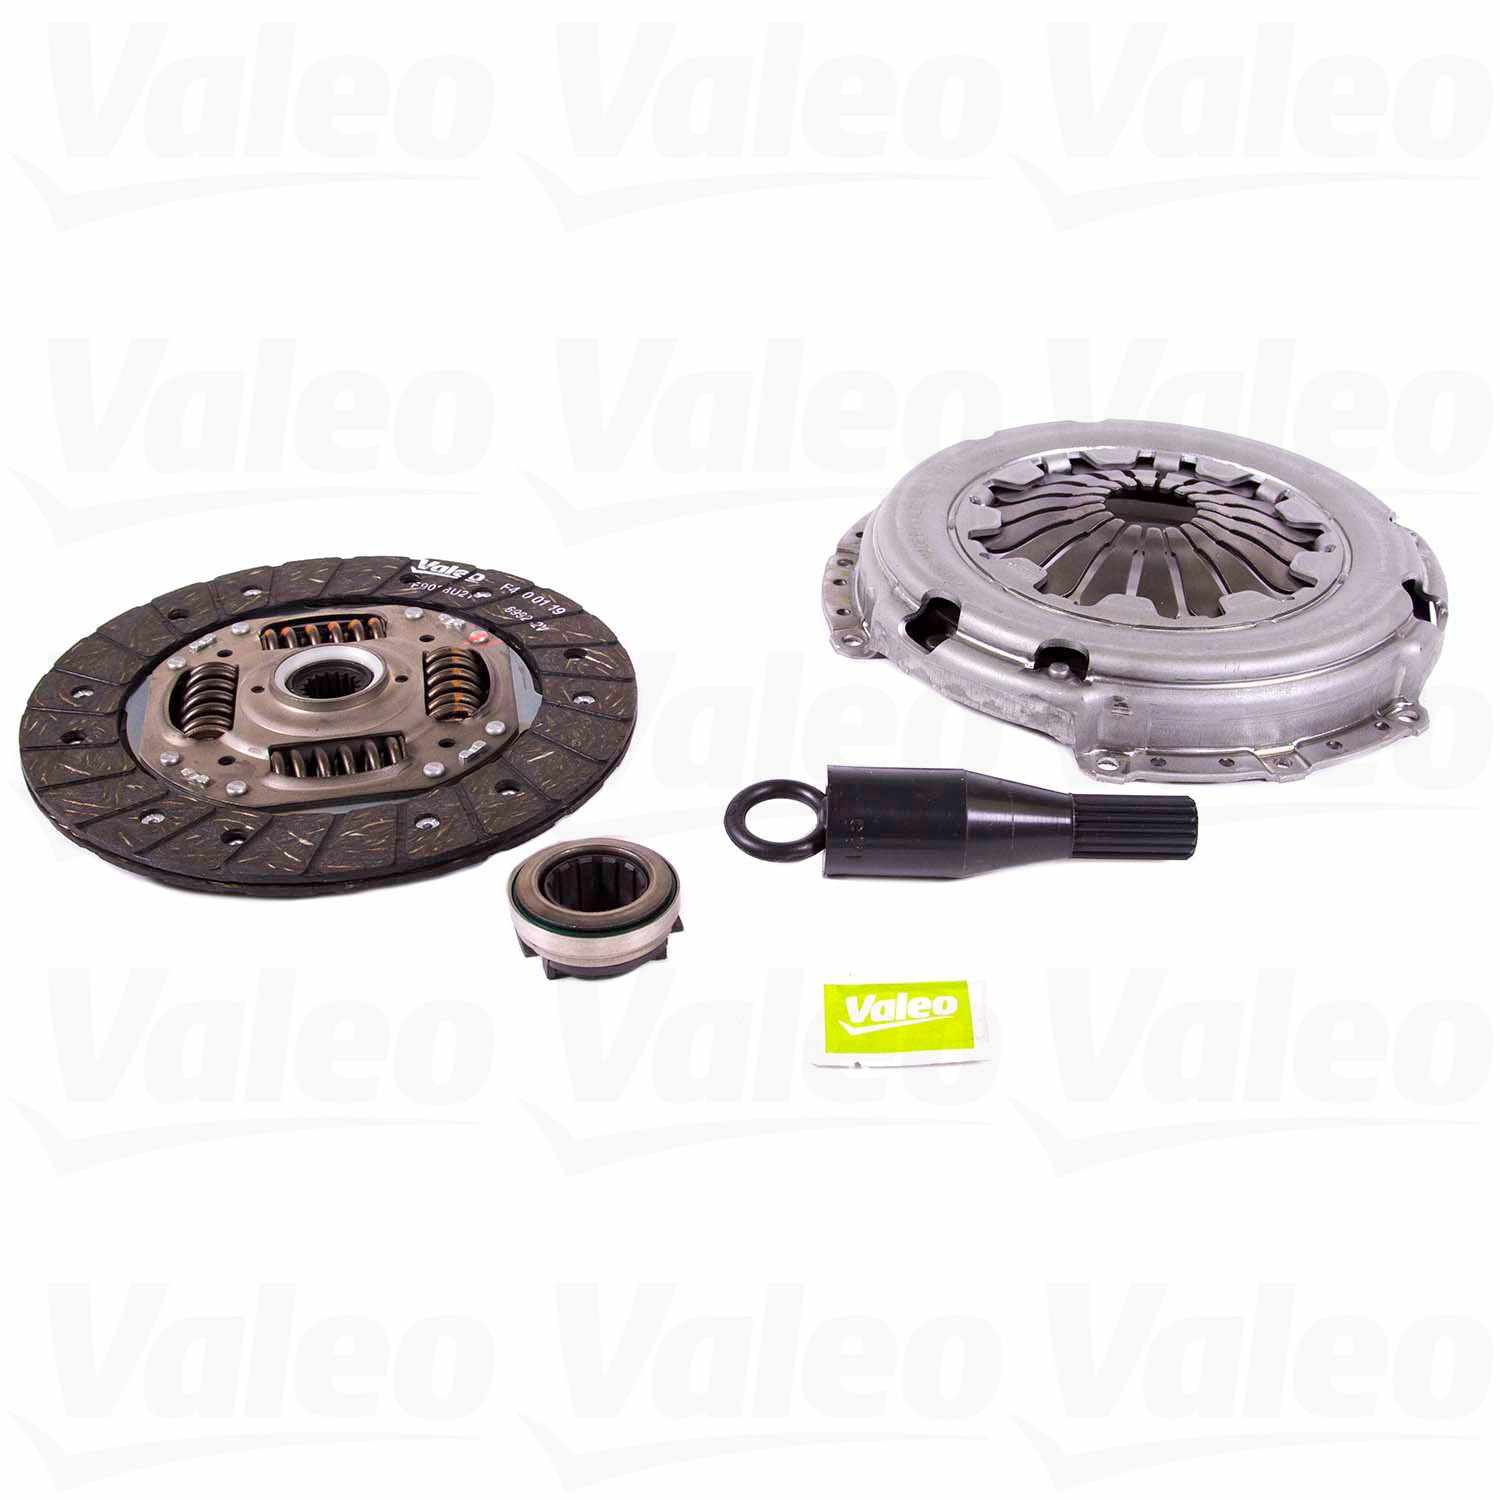 Front View of Transmission Clutch Kit VALEO 52001202